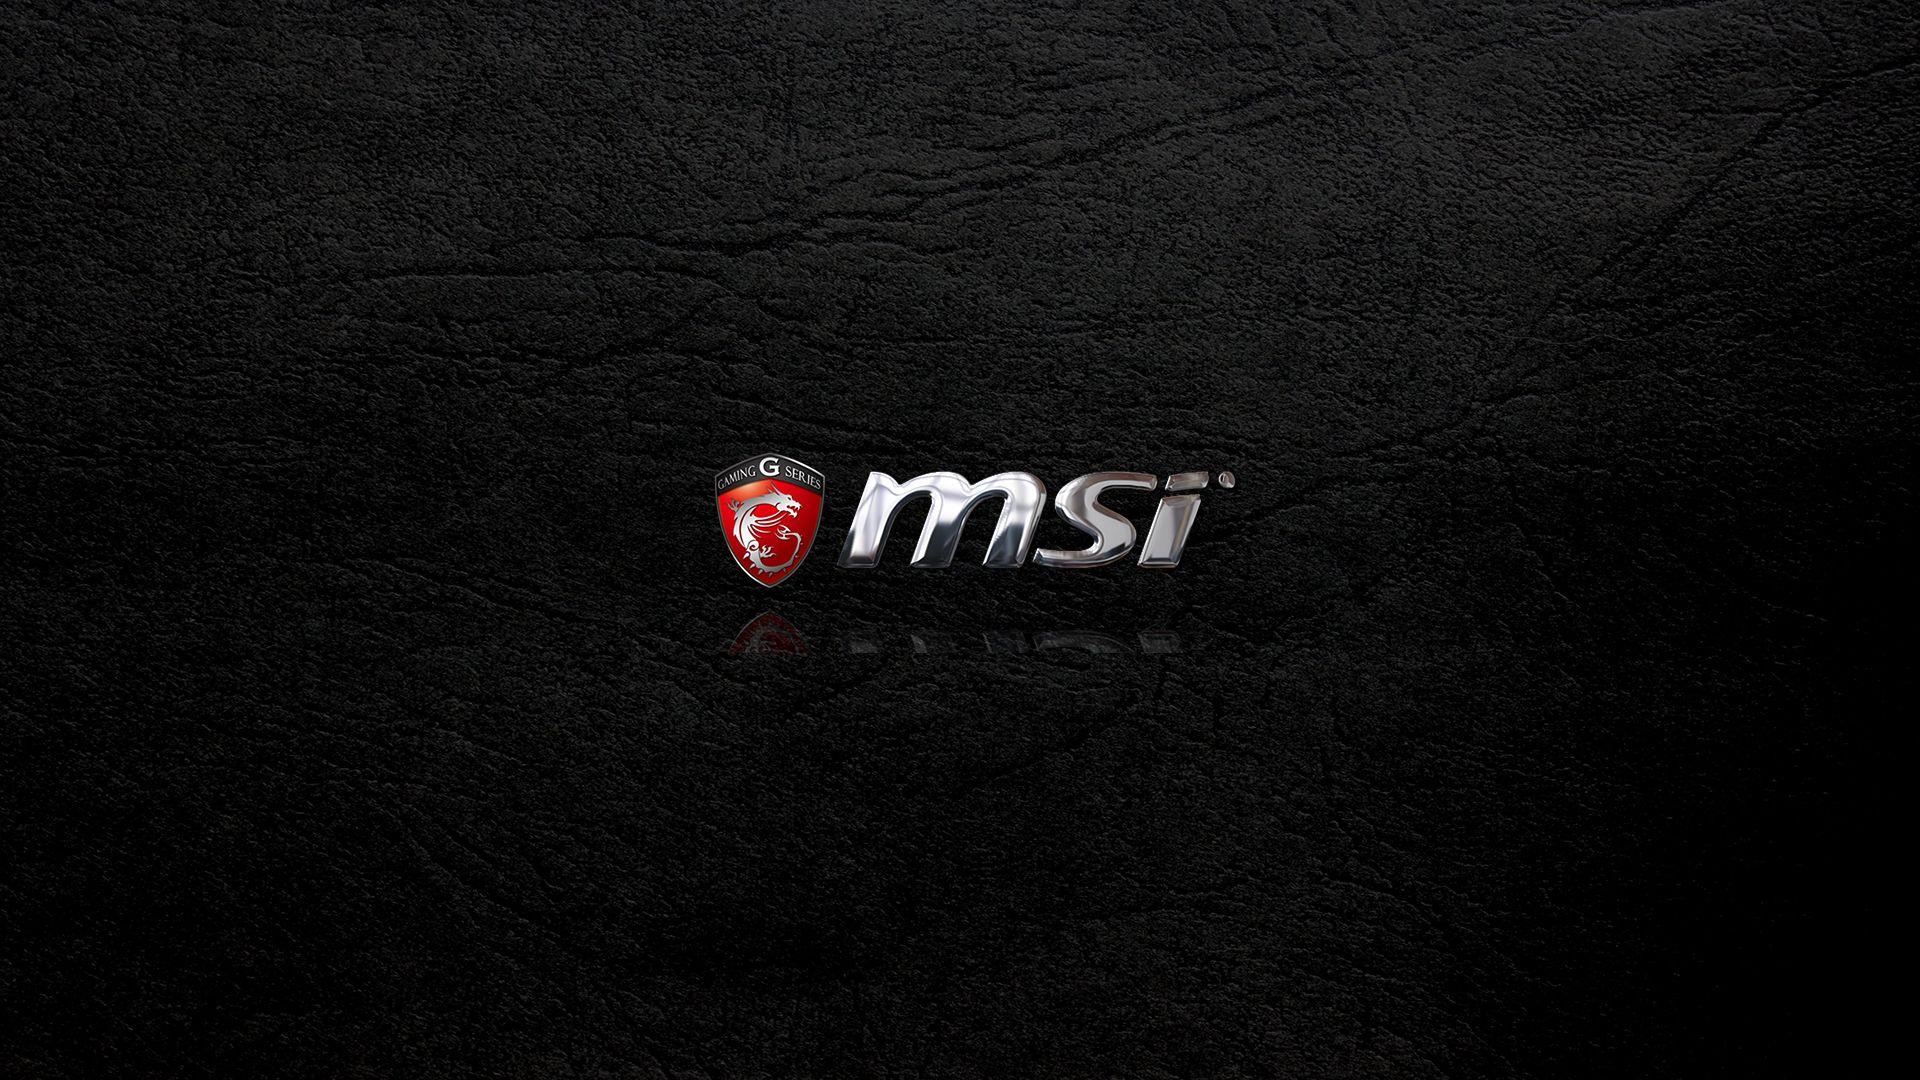 Msi Amd Wallpapers Top Free Msi Amd Backgrounds Wallpaperaccess